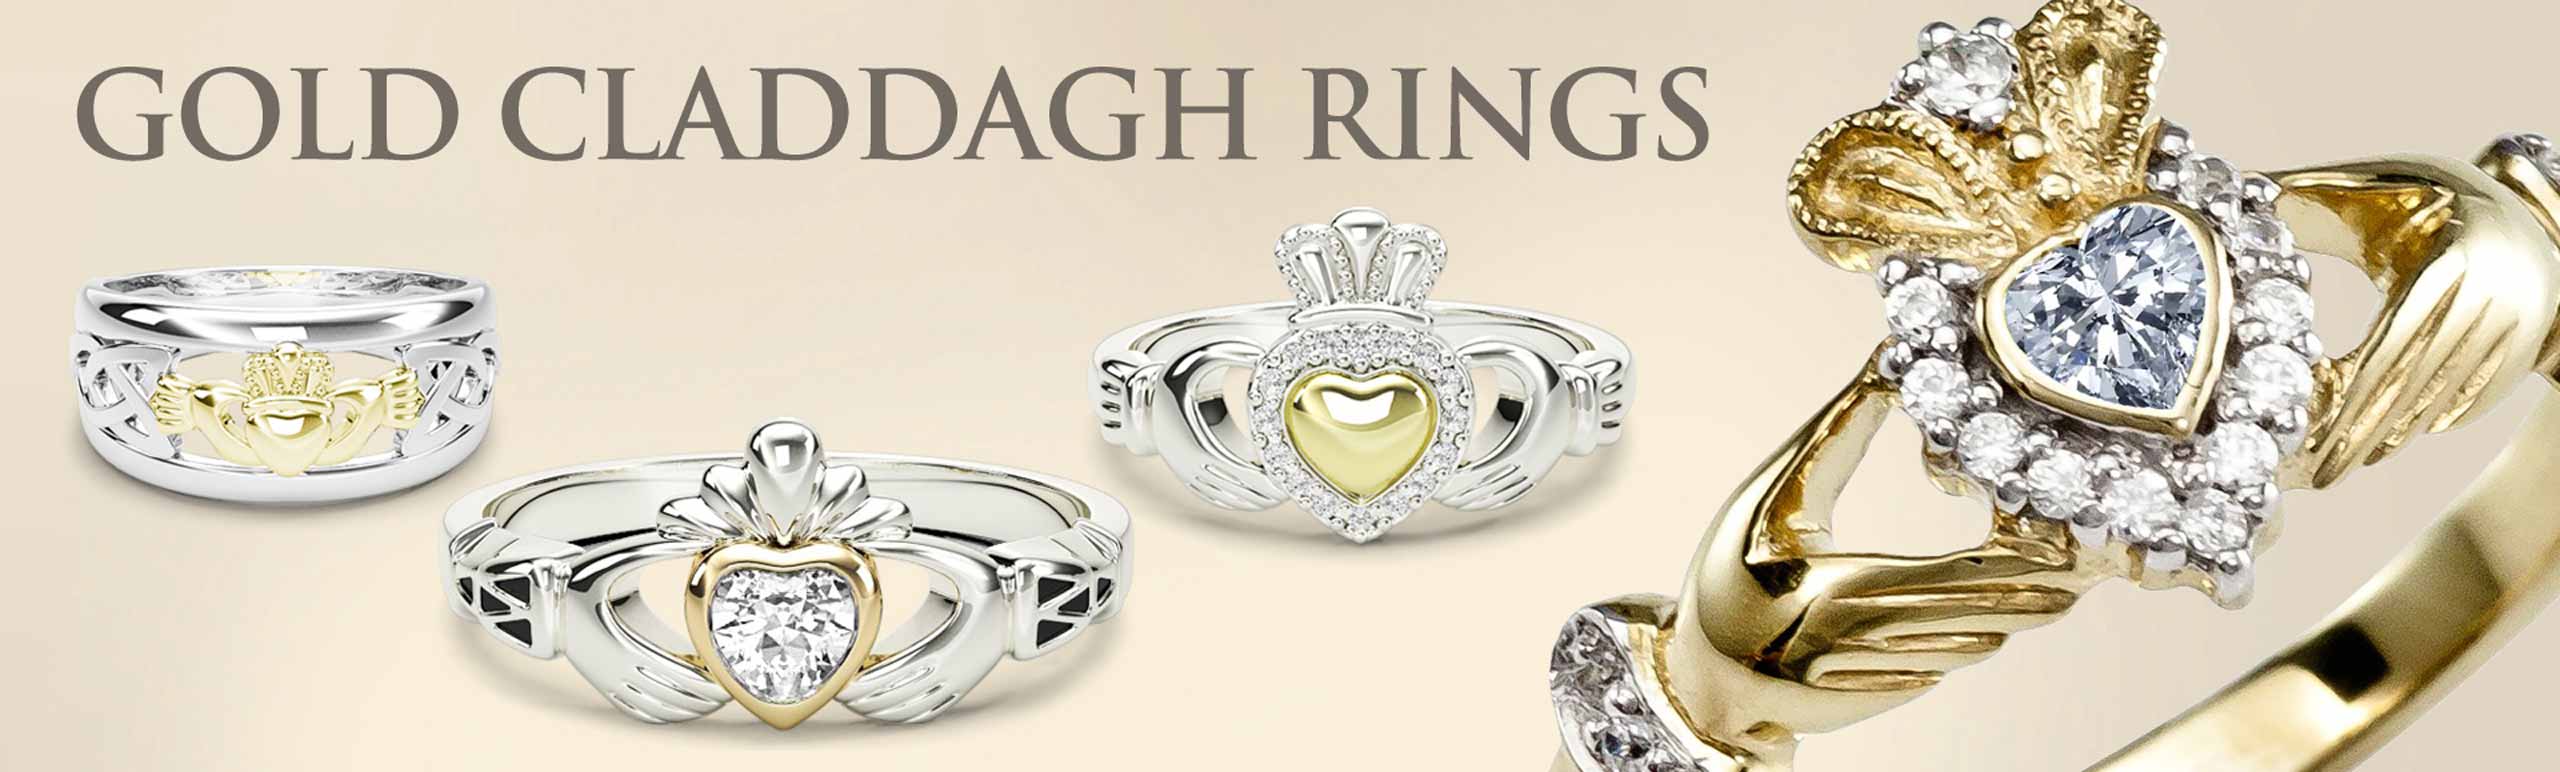 GOLD CLADDAGH RINGS